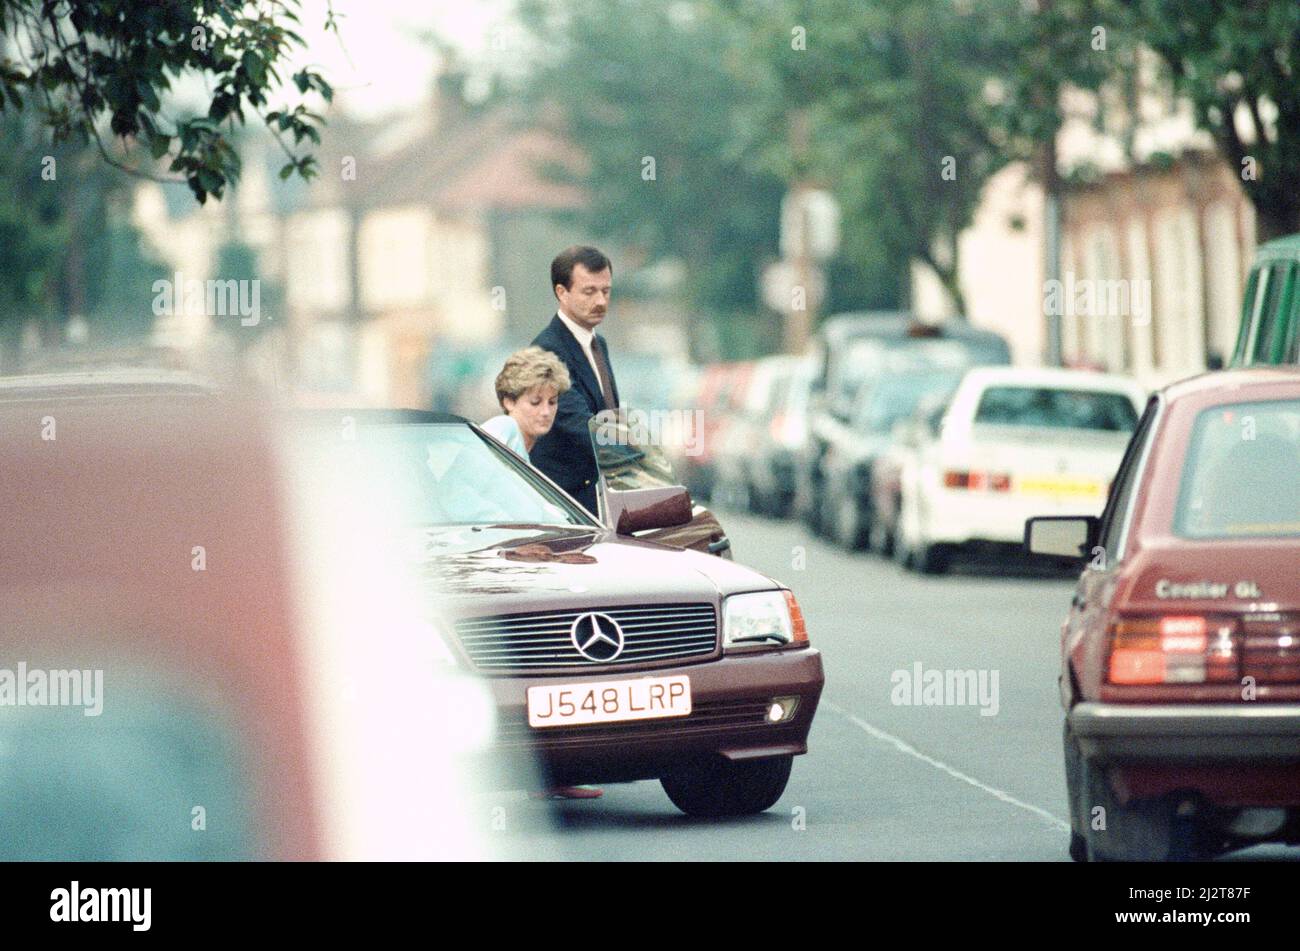 Princess Diana returns to car after visiting friend Carolyn Bartholmew, former flatmate, in London, Wednesday 10th June 1992. Carolyn Bartholmew contributed to a controversial book about Diana's marriage. Carolyn told how Diana suffered from the slimming disease bulimia nervosa and her desperate unhappiness.  But the princess gave her seal of approval to her friend with a kiss. Diana clearly told the world: 'I approve of everything she has done.'   The Press was tipped off so they could witness last night's emotional scene.   Diana spent an hour with Carolyn, her husband William and son Jack. Stock Photo